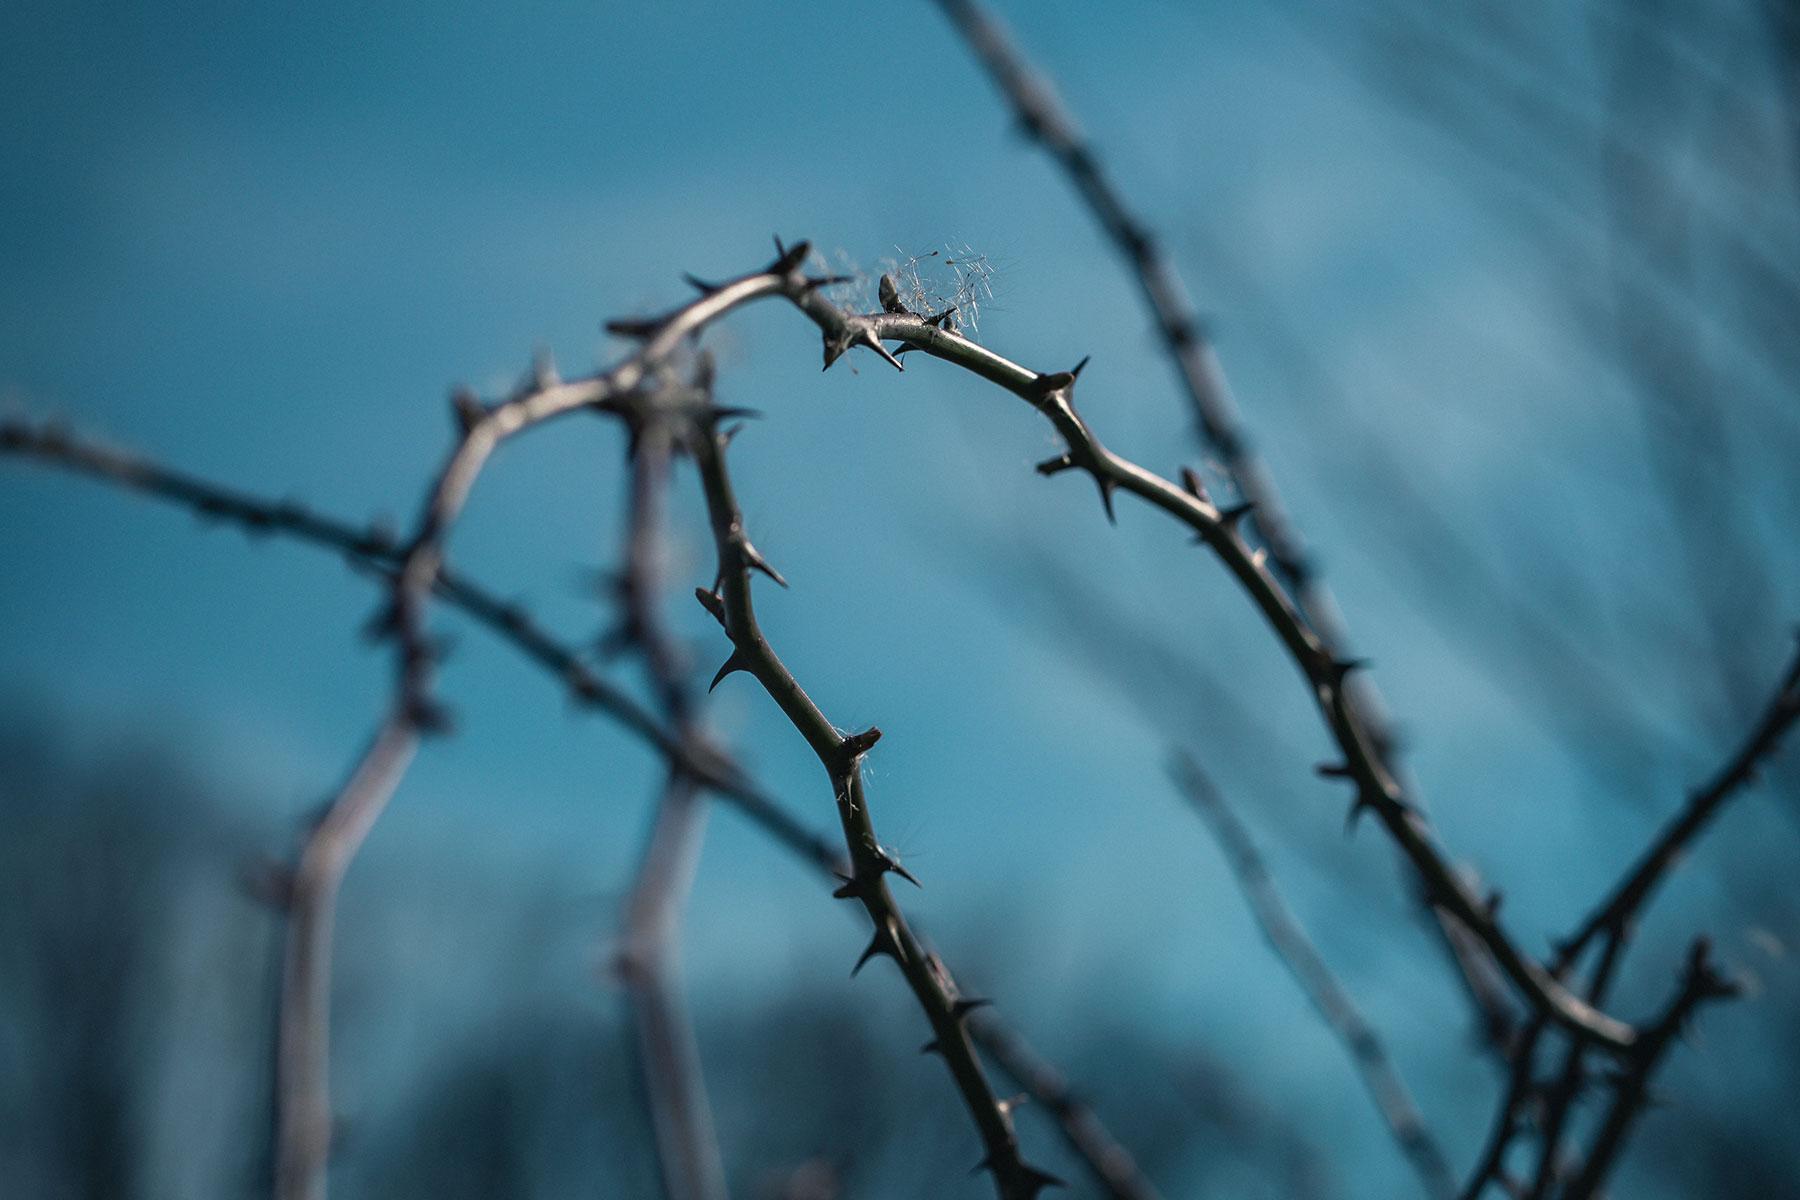 In LWF's Good Friday message Archbishop Dr Antje JackelÃ©n, Vice President for the Nordic countries, strikes up a conversation on suffering and meaning with the author of 1Peter. Photo by Dominik Kempf on Unsplash